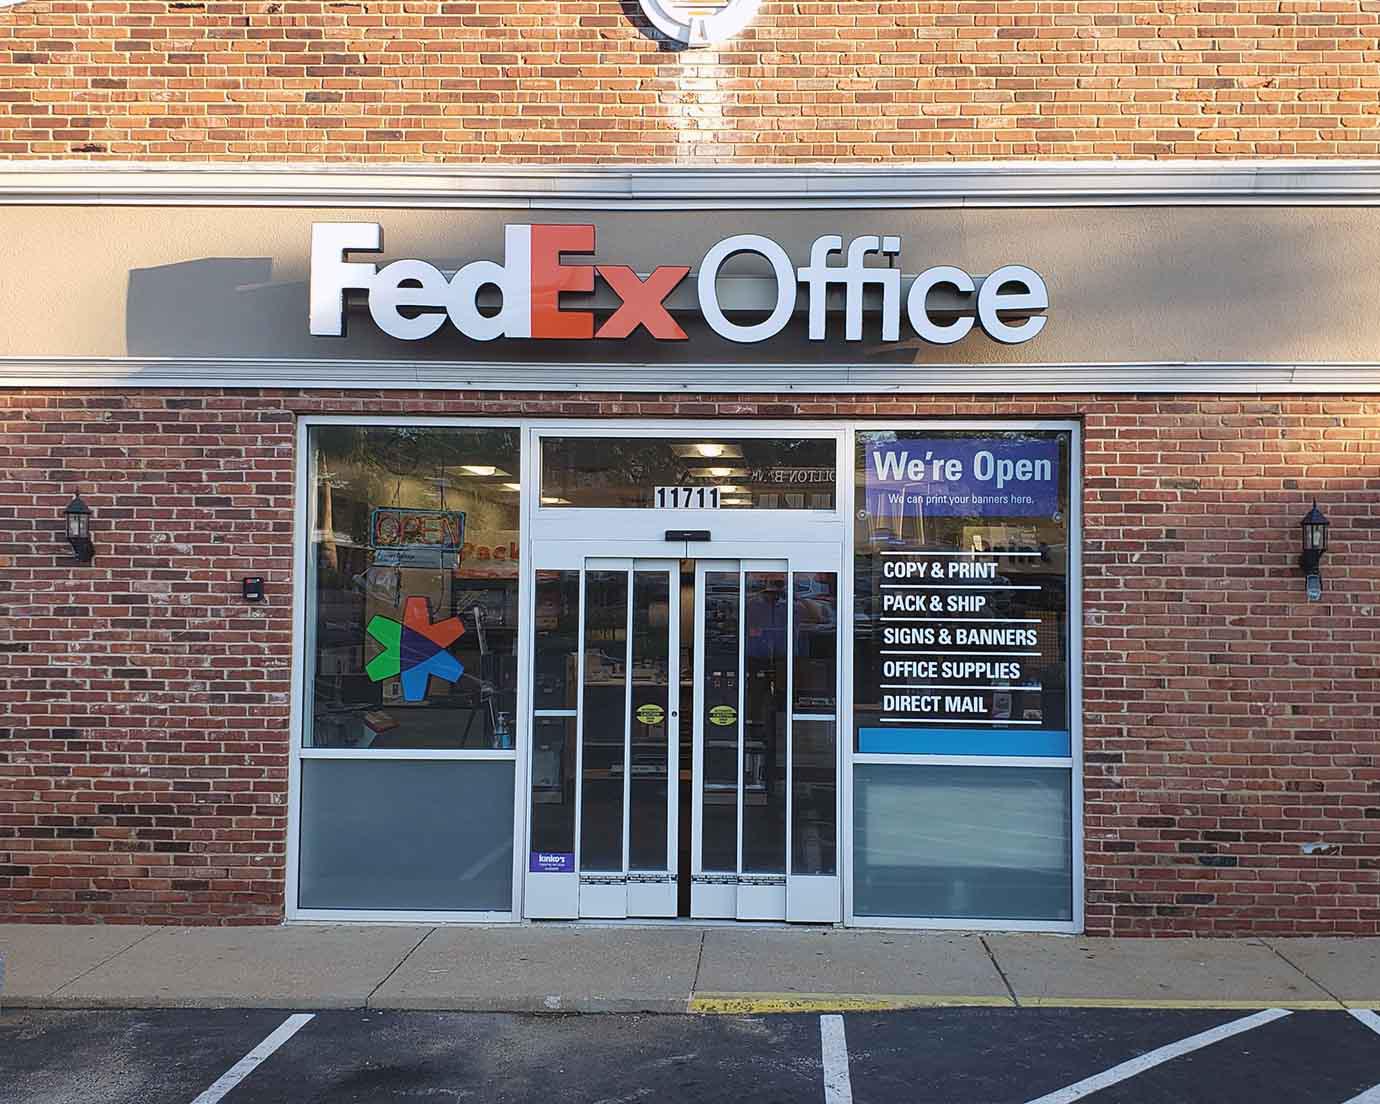 Exterior photo of FedEx Office location at 11711 Manchester Rd\t Print quickly and easily in the self-service area at the FedEx Office location 11711 Manchester Rd from email, USB, or the cloud\t FedEx Office Print & Go near 11711 Manchester Rd\t Shipping boxes and packing services available at FedEx Office 11711 Manchester Rd\t Get banners, signs, posters and prints at FedEx Office 11711 Manchester Rd\t Full service printing and packing at FedEx Office 11711 Manchester Rd\t Drop off FedEx packages near 11711 Manchester Rd\t FedEx shipping near 11711 Manchester Rd